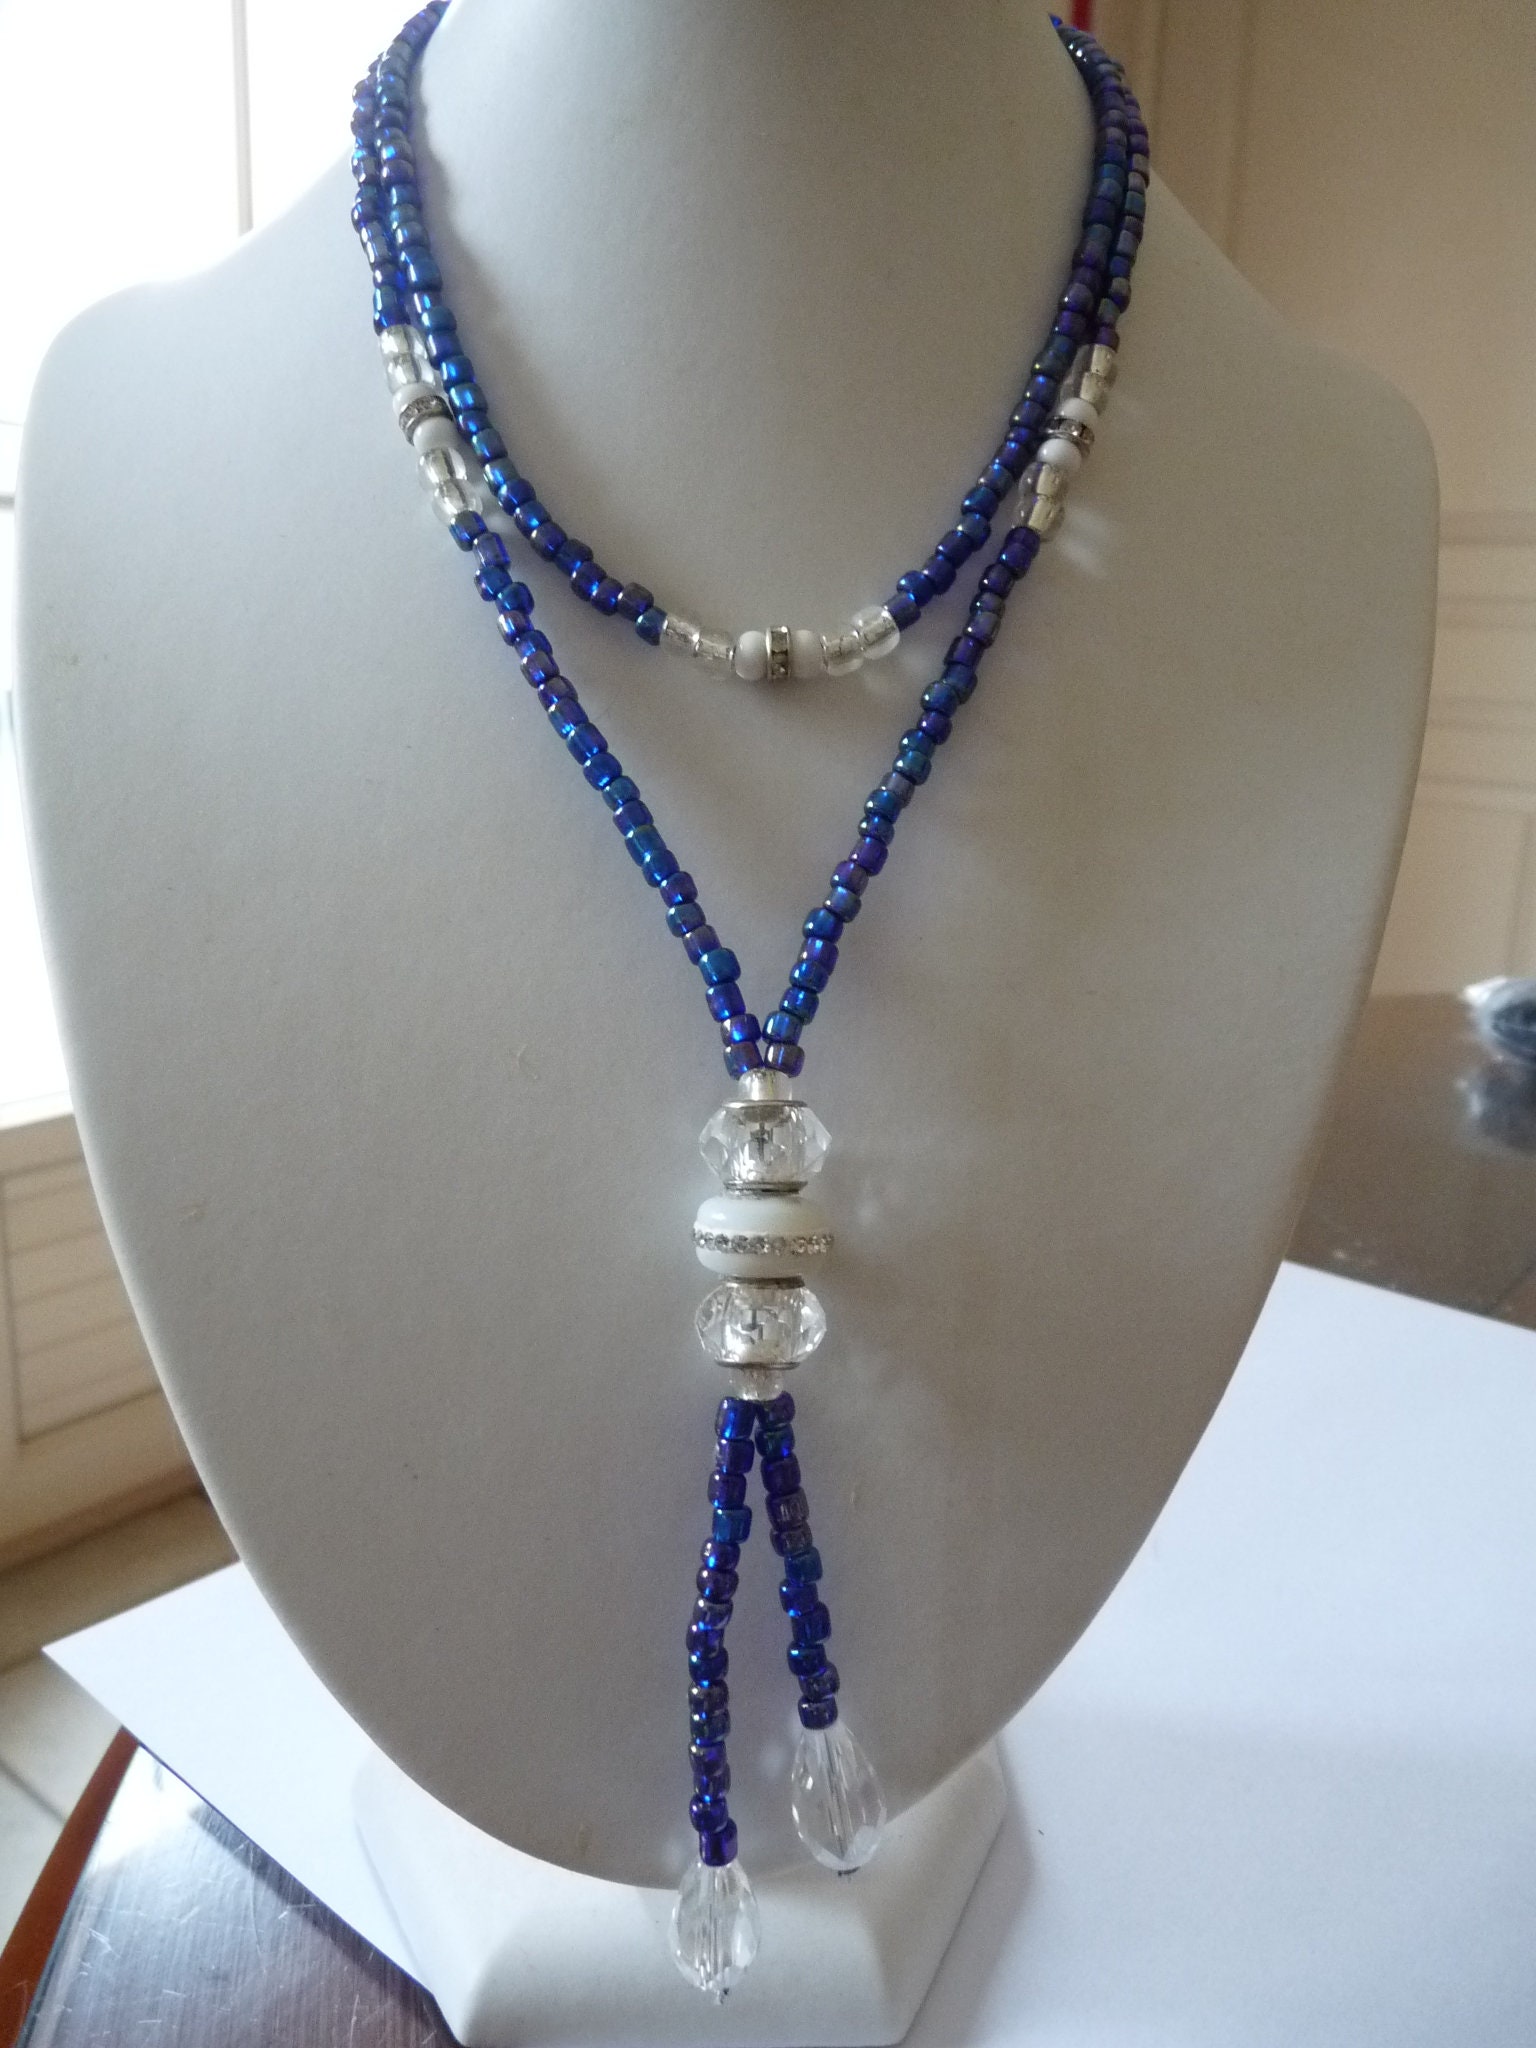 Sautoir necklace in rockery beads and beads pandora style blue | Etsy